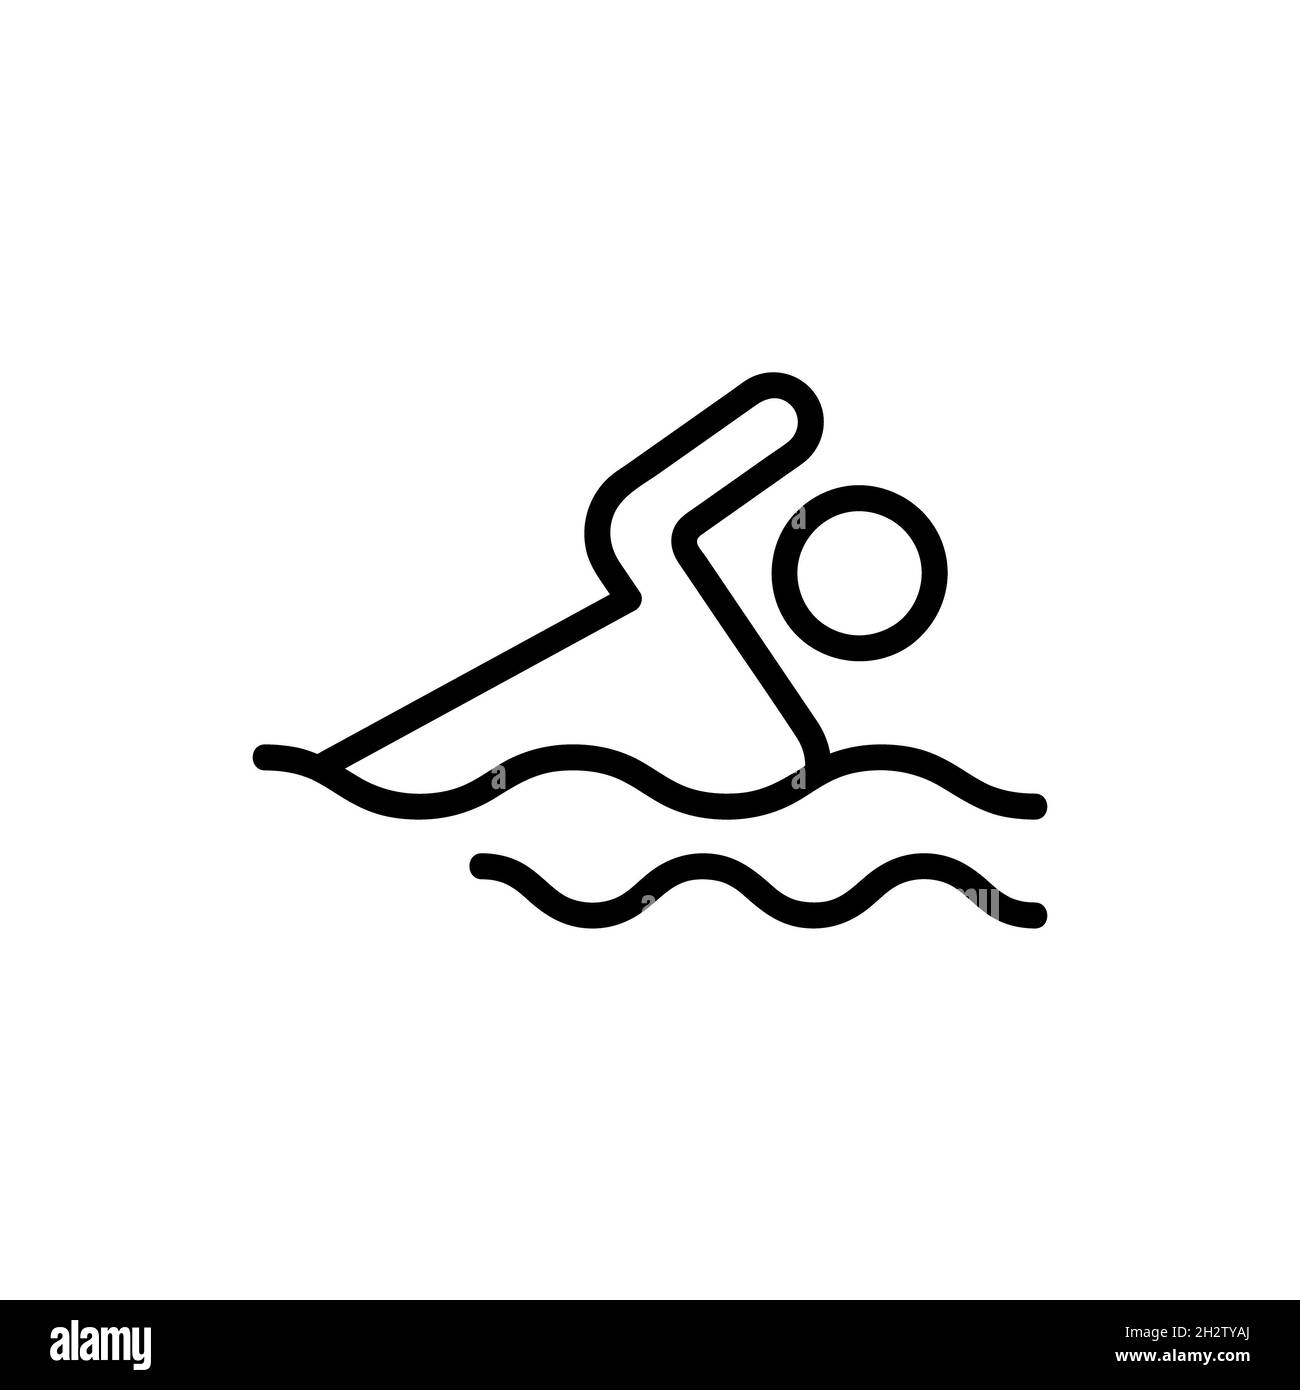 Swimmer in pool icon. Flat pictogram for web. Line stroke. Simple waves symbol isolated on white background. Outline icon vector eps10 Stock Photo